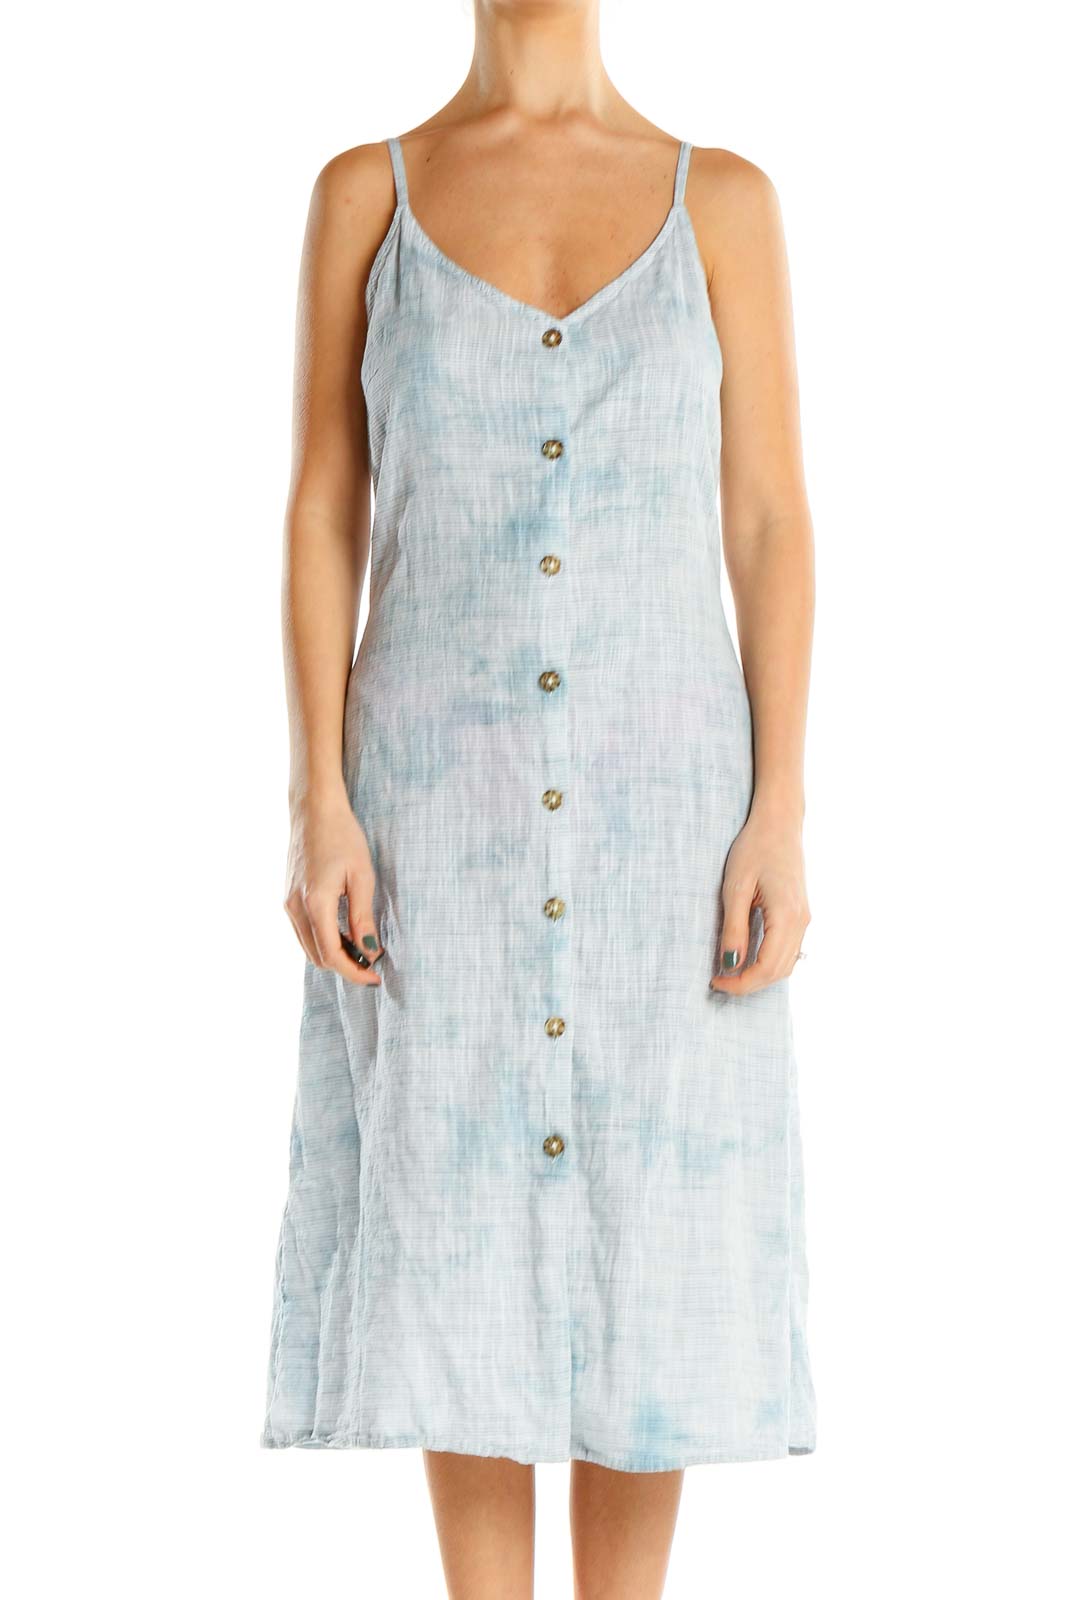 Blue Tie And Dye Casual A-Line Dress Front